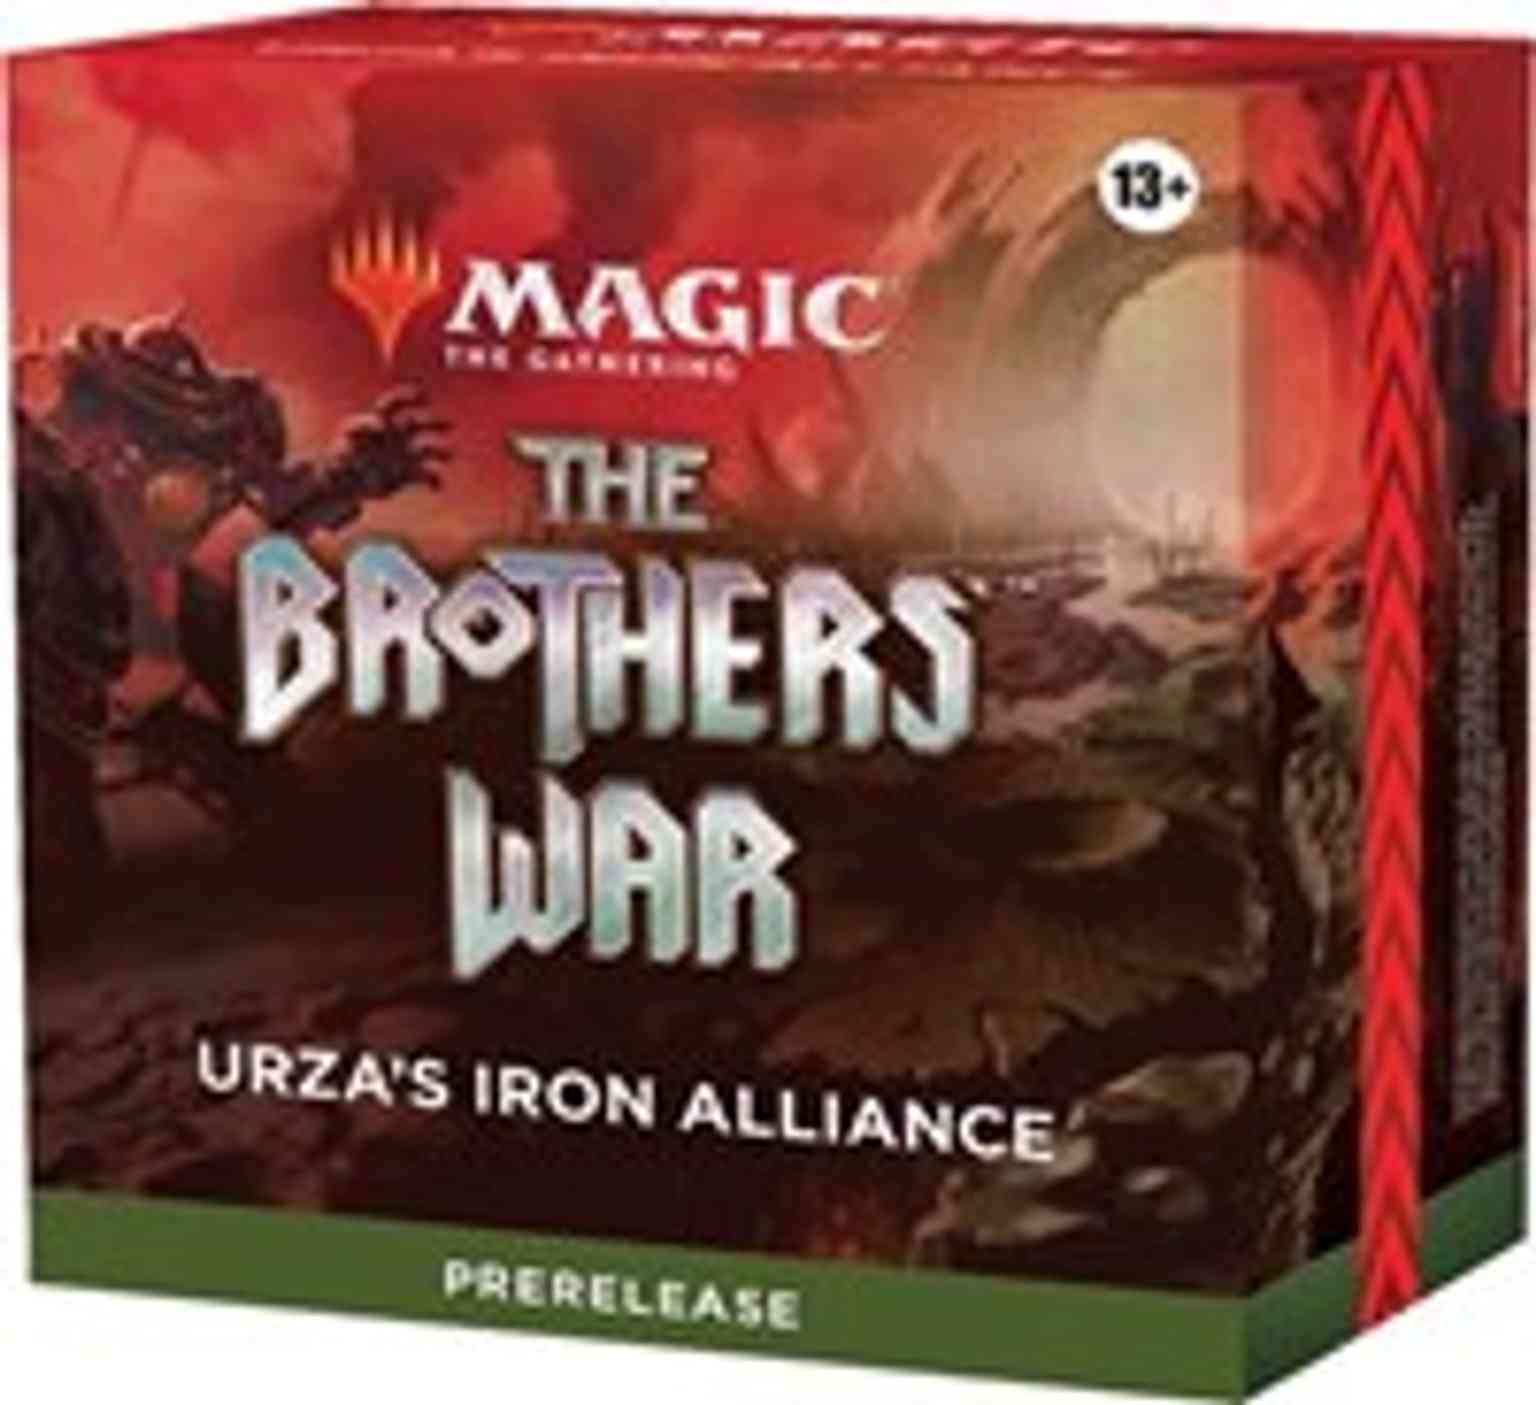 The Brothers' War - Prerelease Pack (Urza's Iron Alliance) magic card front